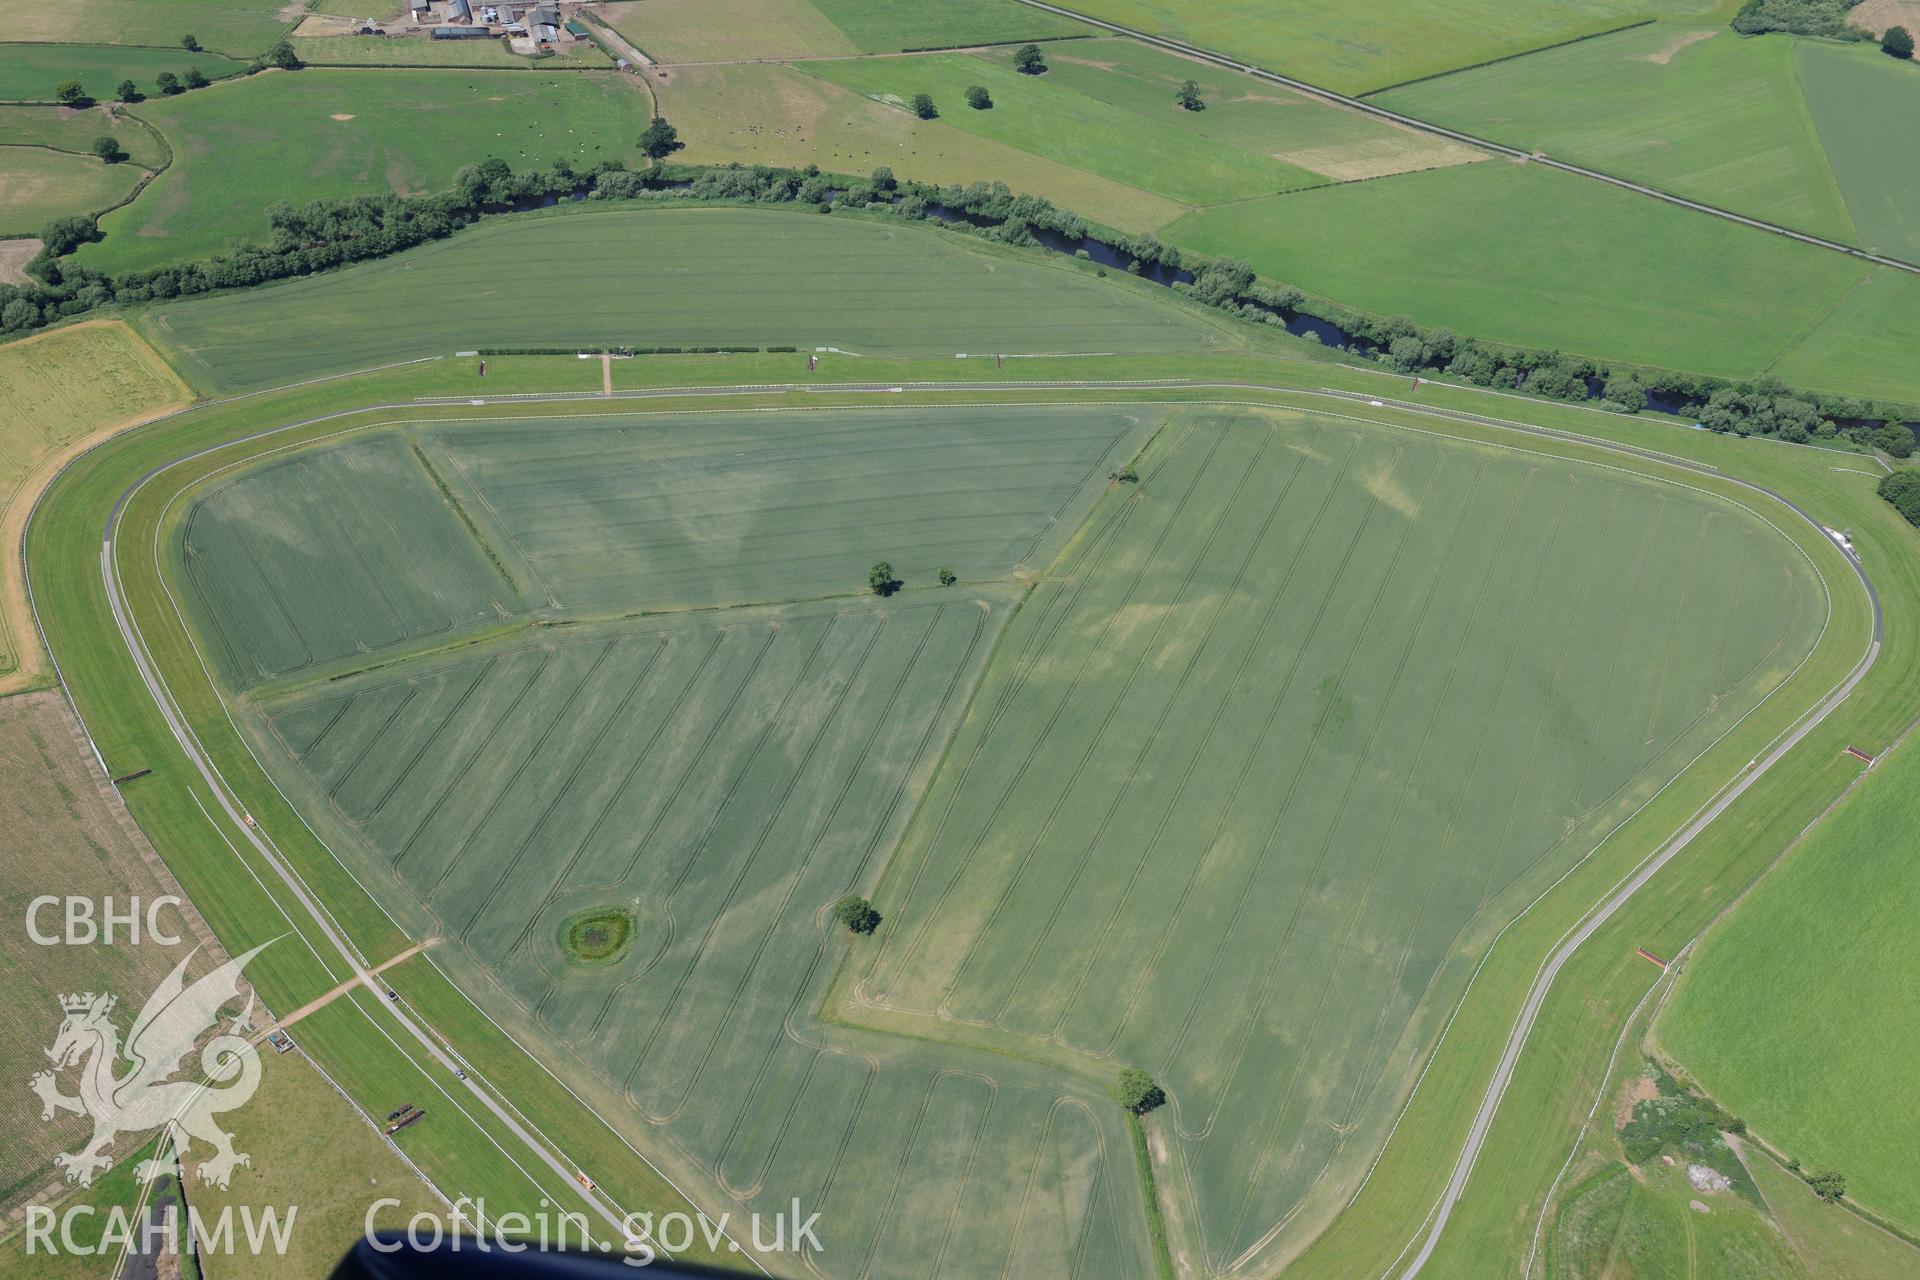 Enclosure at Bangor Racecourse, south east of Wrexham. Oblique aerial photograph taken during the Royal Commission's programme of archaeological aerial reconnaissance by Toby Driver on 30th June 2015.